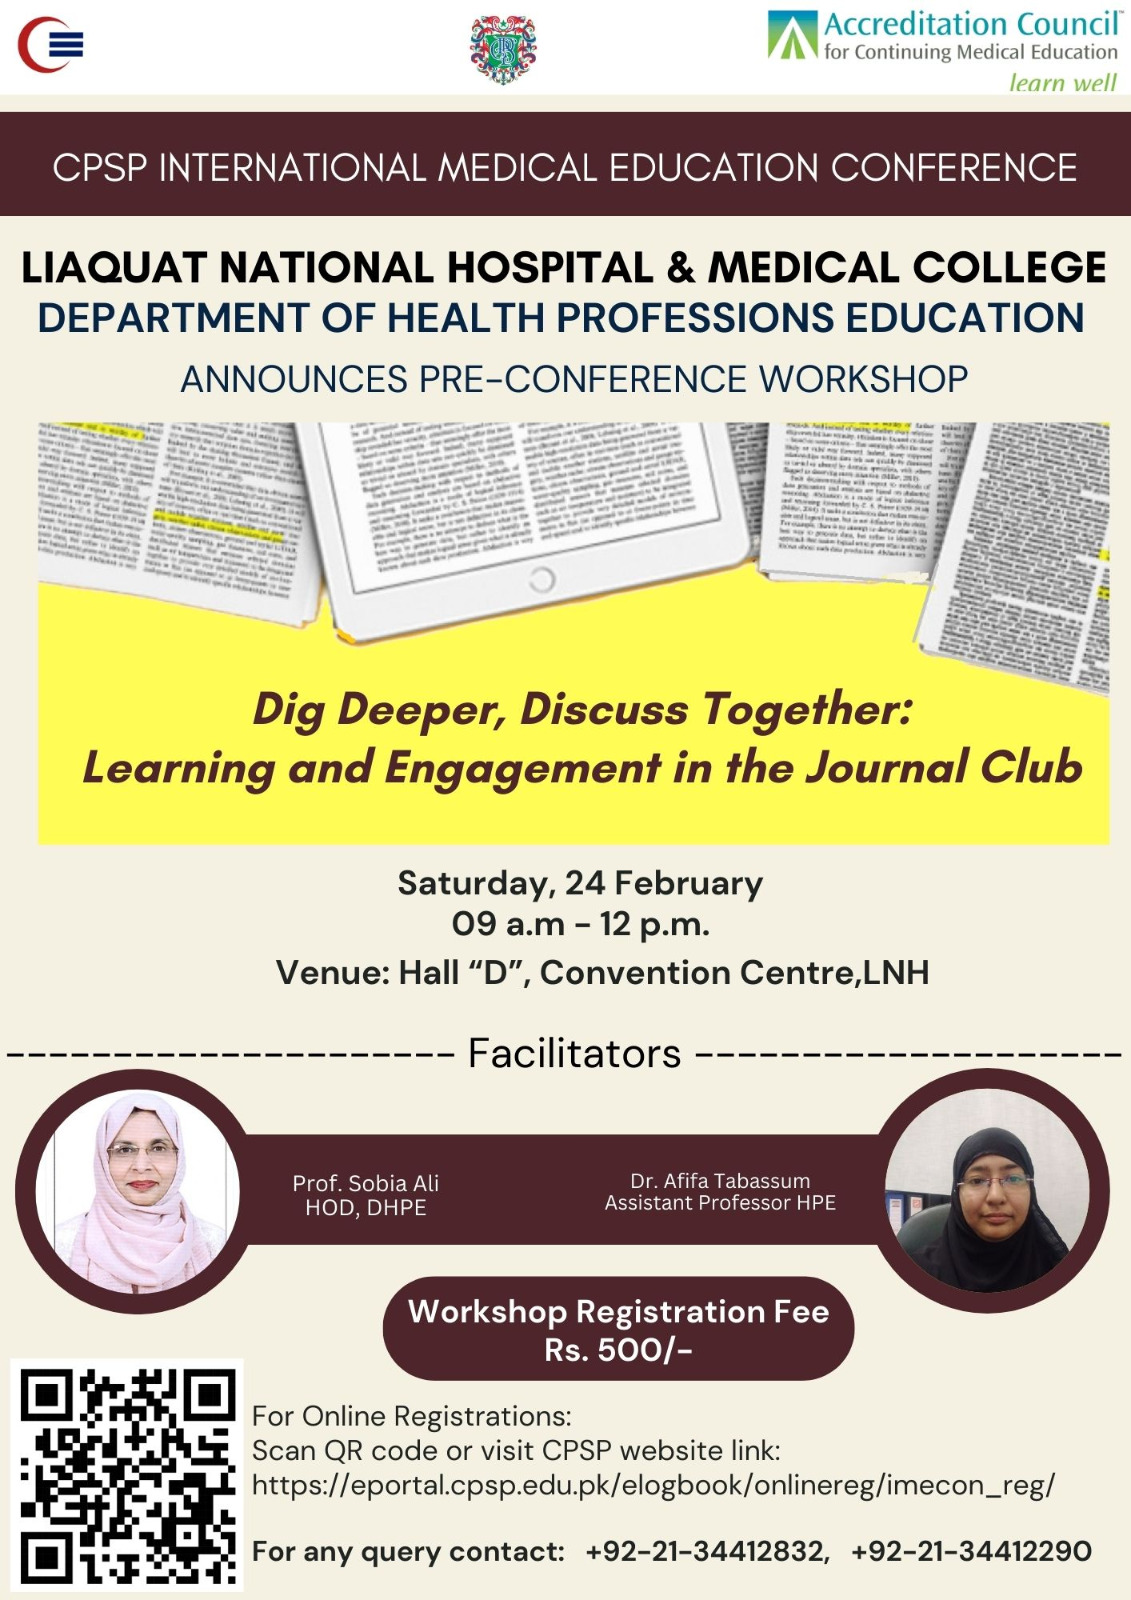 CPSP Int’l Medical Education Conference: Pre-conference Workshop on Learning and Engagement in the Journal Club